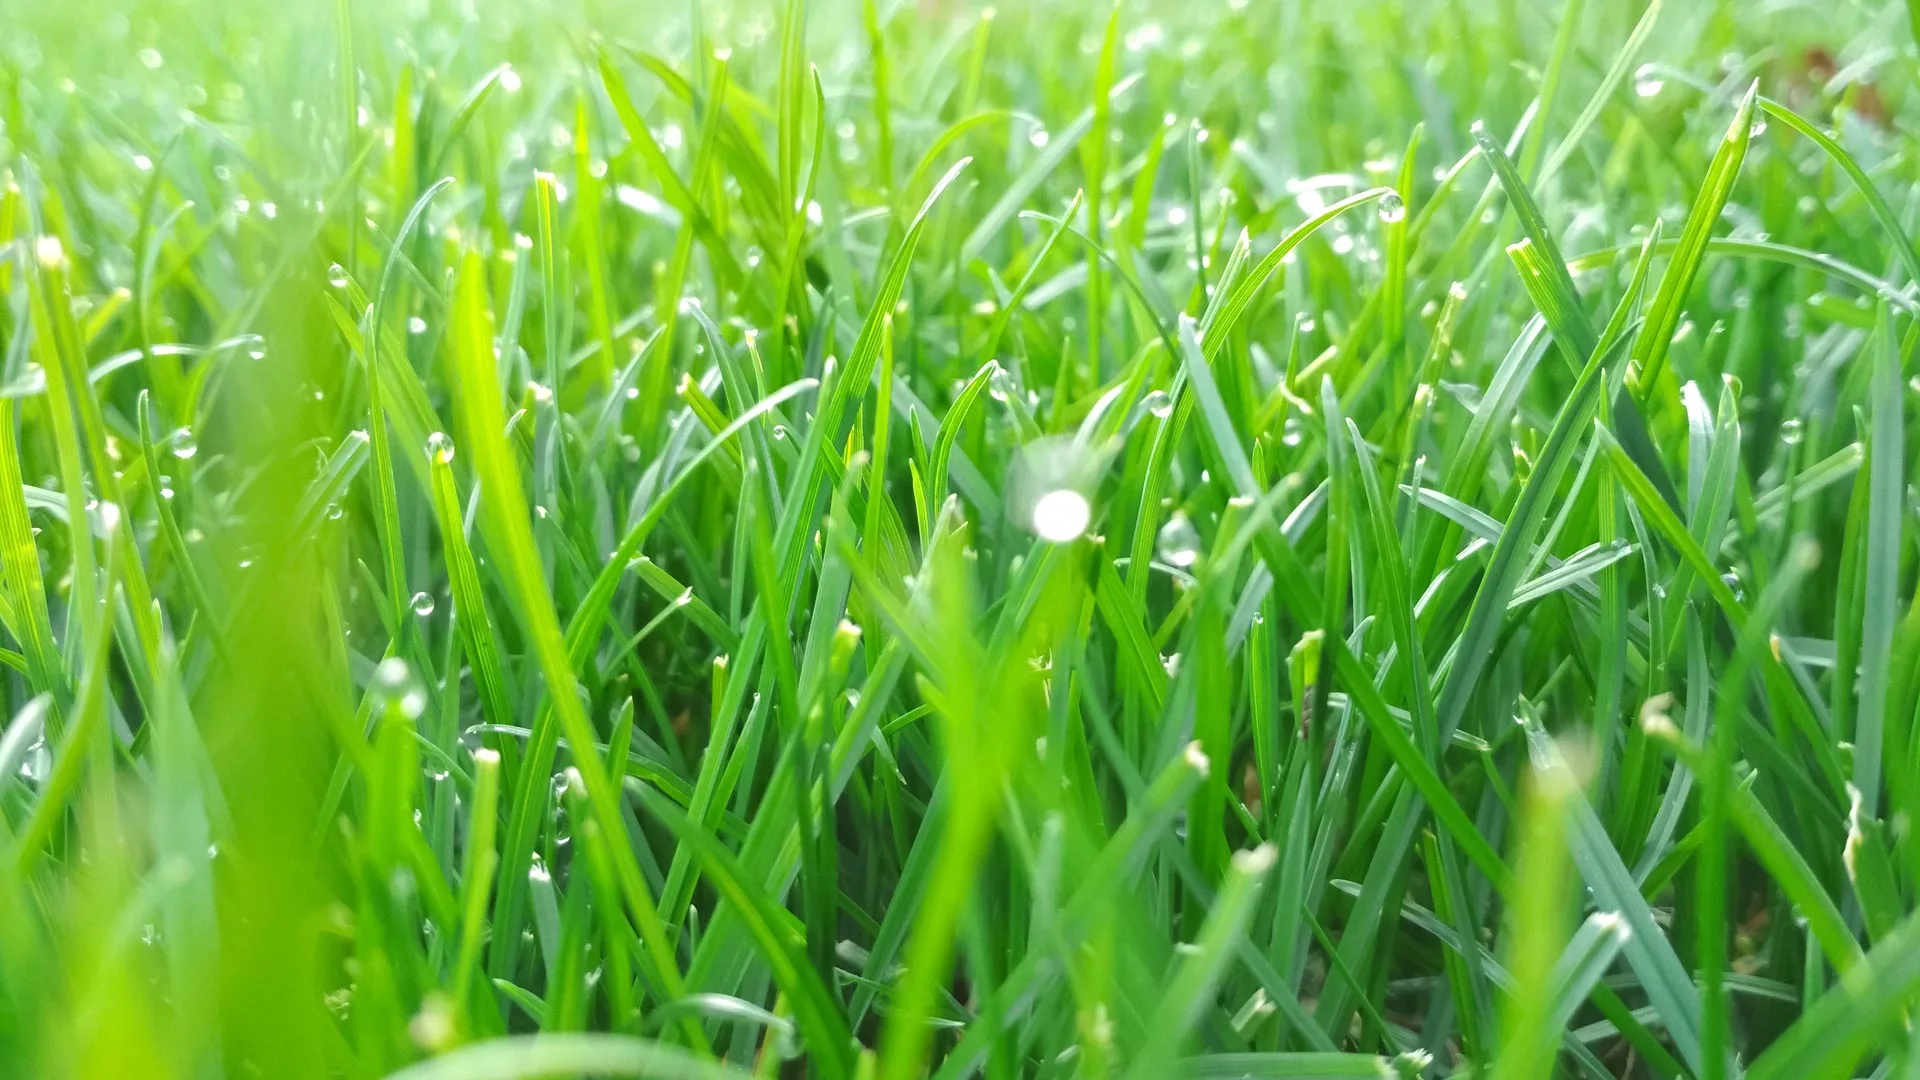 A healthy serviced lawn in Tampa, FL.